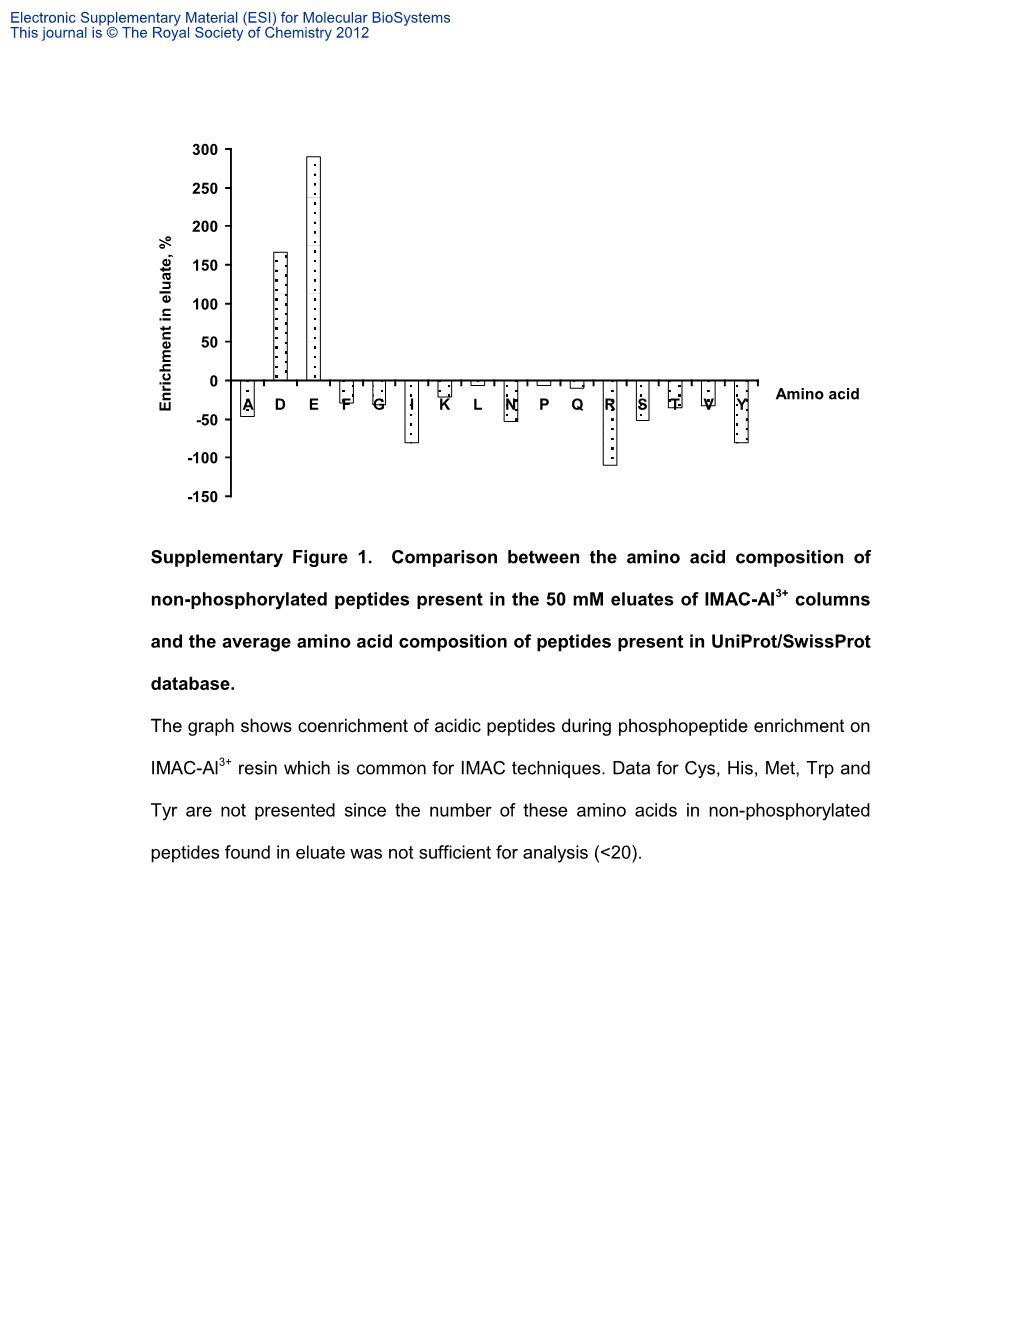 Supplementary Figure 1. Comparison Between the Amino Acid Composition Of